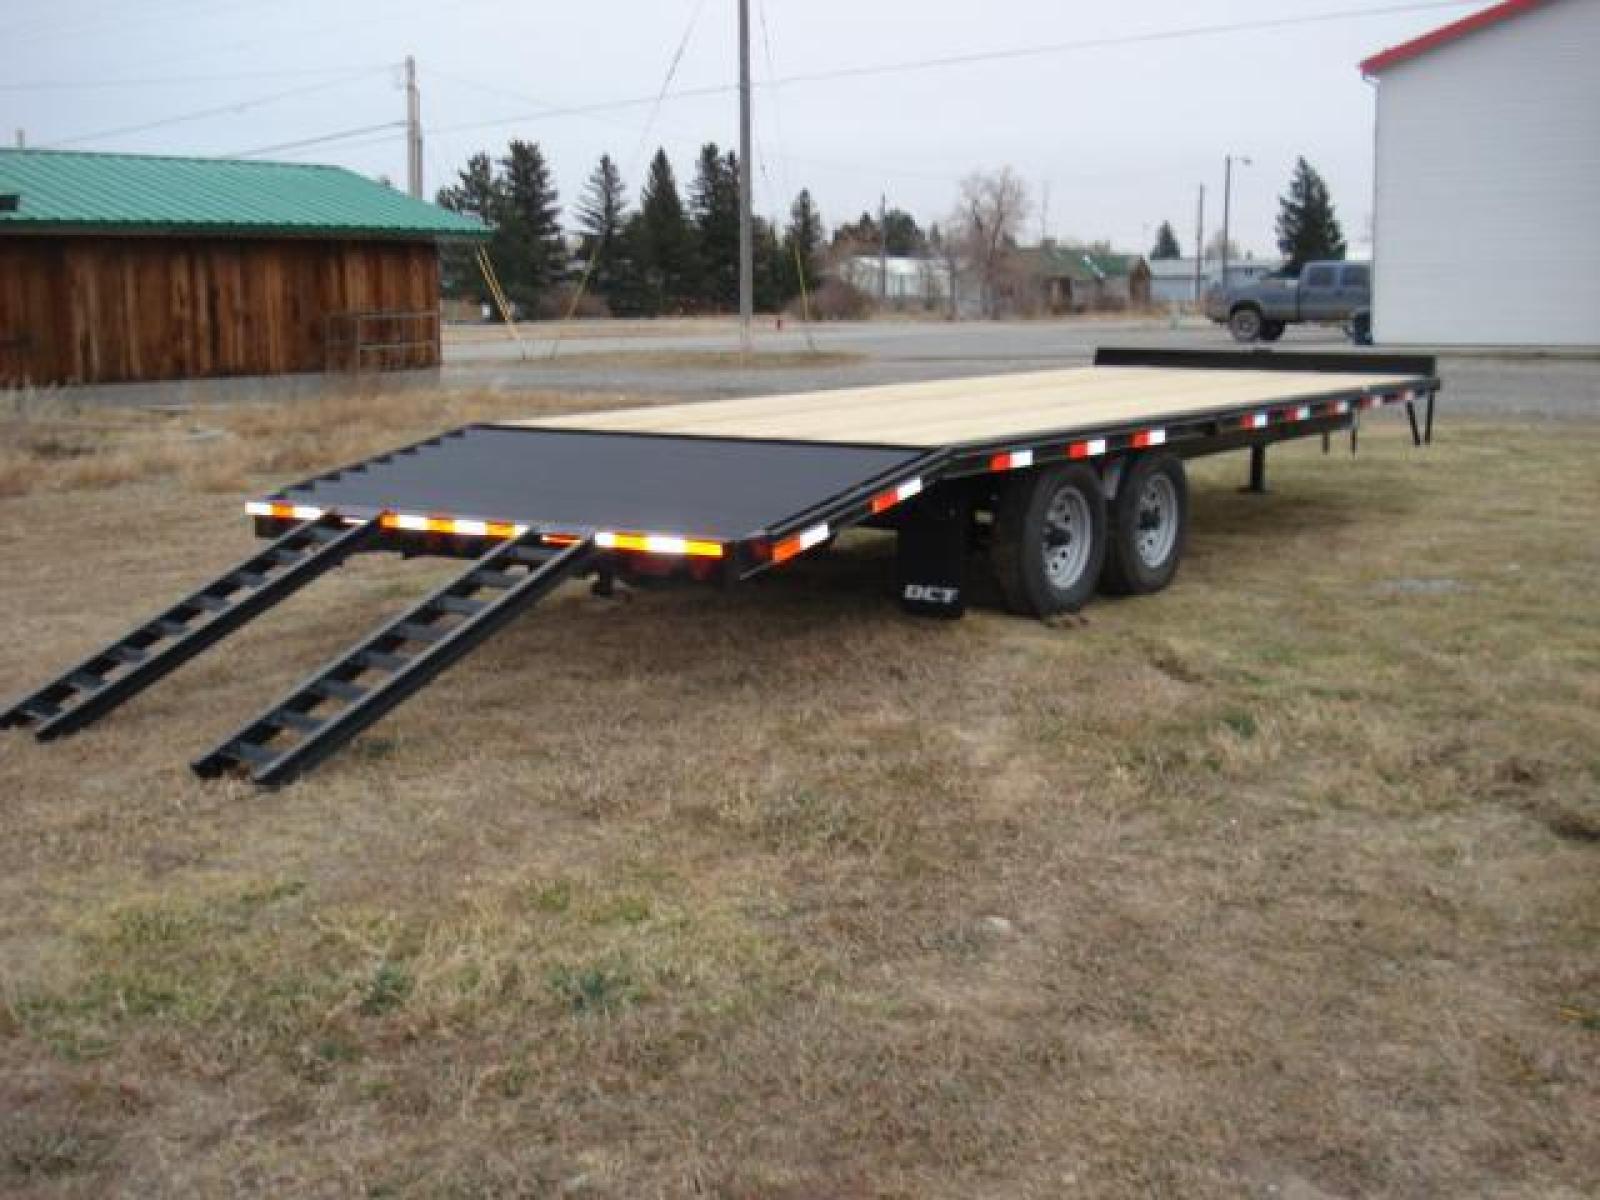 2022 Black DCT 81/2 x 20 + 4 Deckover Equip , located at 310 West 1st Ave, Big Timber, MT, 59011, (406) 860-8510, 45.833511, -109.957809 - DCT 81/2 X 20 + 4 DECKOVER BUMPER-PULL EQUIPMENT TRAILER, 4' DOVETAIL, 14K GVW, 2 - 7K AXLES W- EZ LUBE HUBS, HD SLIPPER SPRING SUSPENSION, 16"-10 PLY TIRES, 16" ON CENTER CROSS MEMBERS, LED LIGHTS, TREATED DECK, REAR RAMPS, 2-5-16 ADJUSTABLE COUPLER, 12K DROP FOOT JACK, STAKE POCKETS-RUB RAIL. T - Photo #6